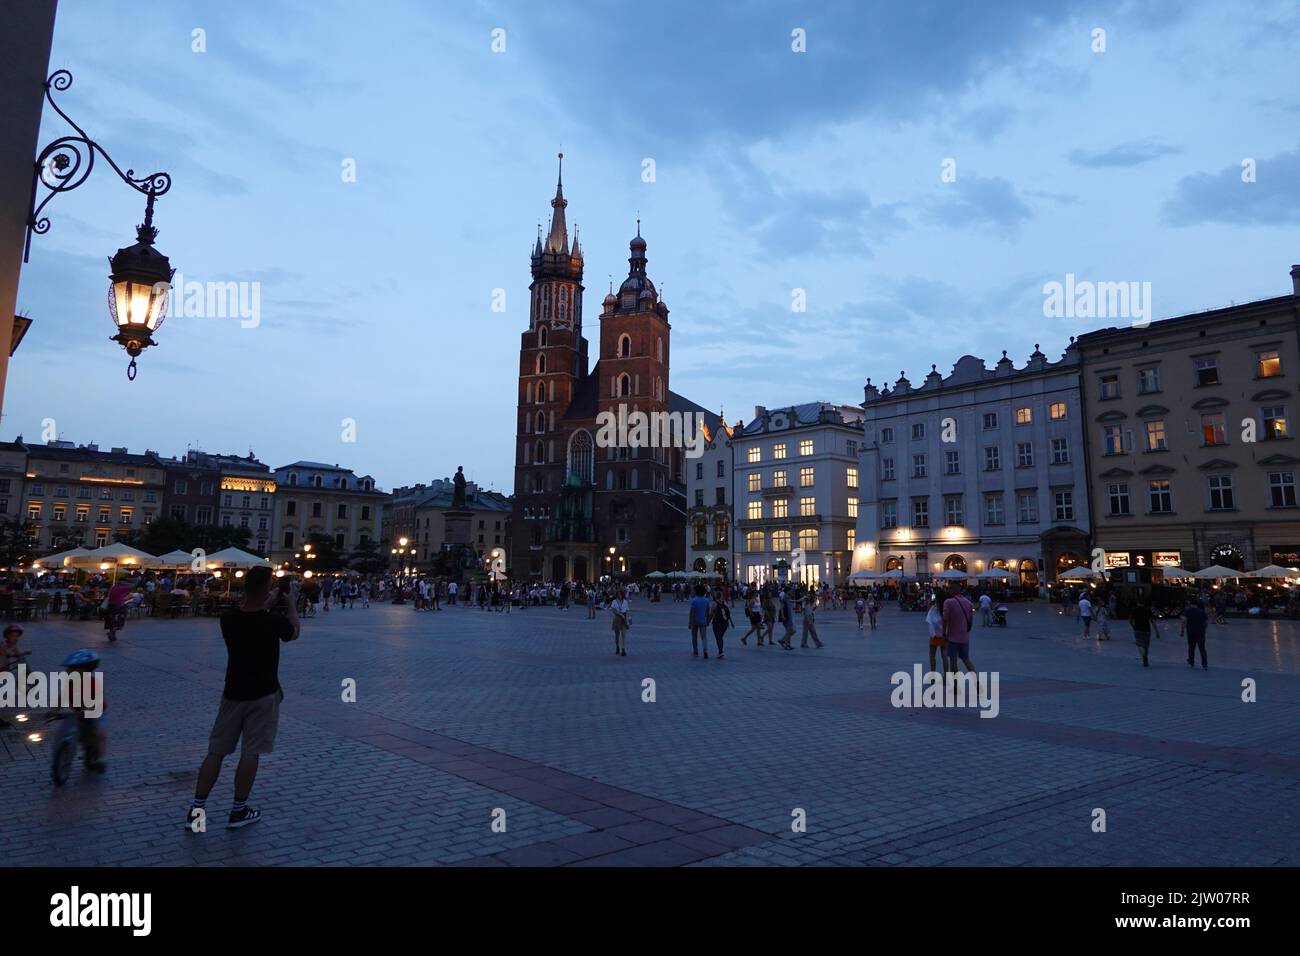 The main square in Krakow old town, Poland, Europe Stock Photo